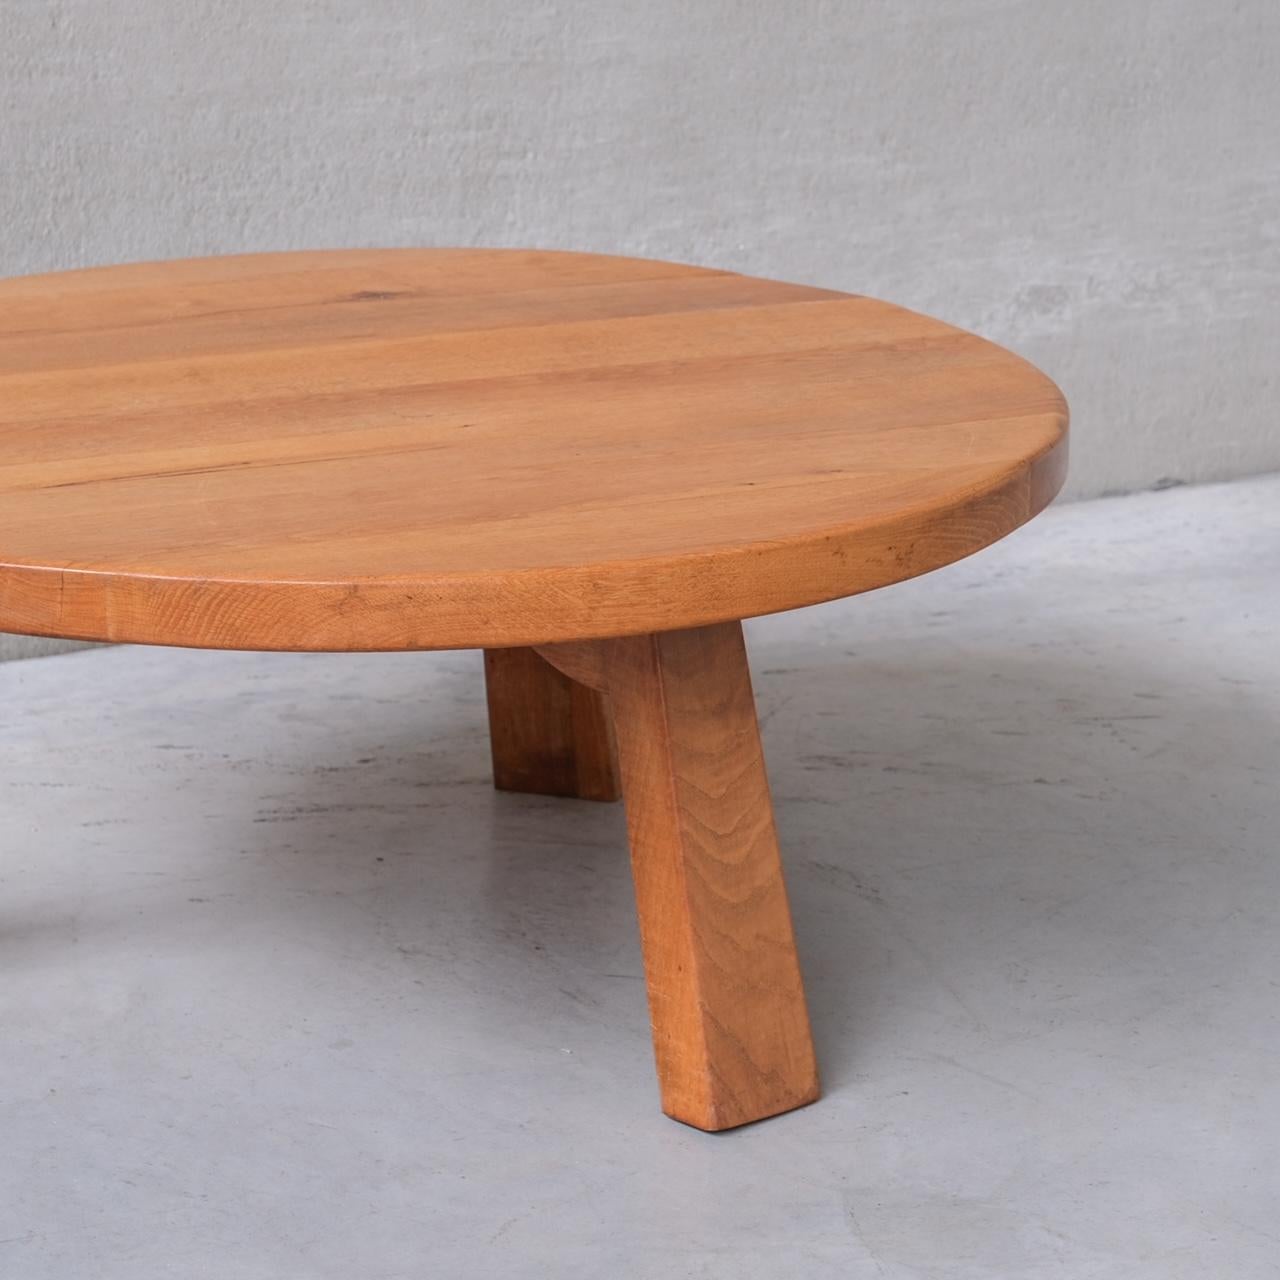 Midcentury Dutch Oak Coffee Table In Good Condition For Sale In London, GB